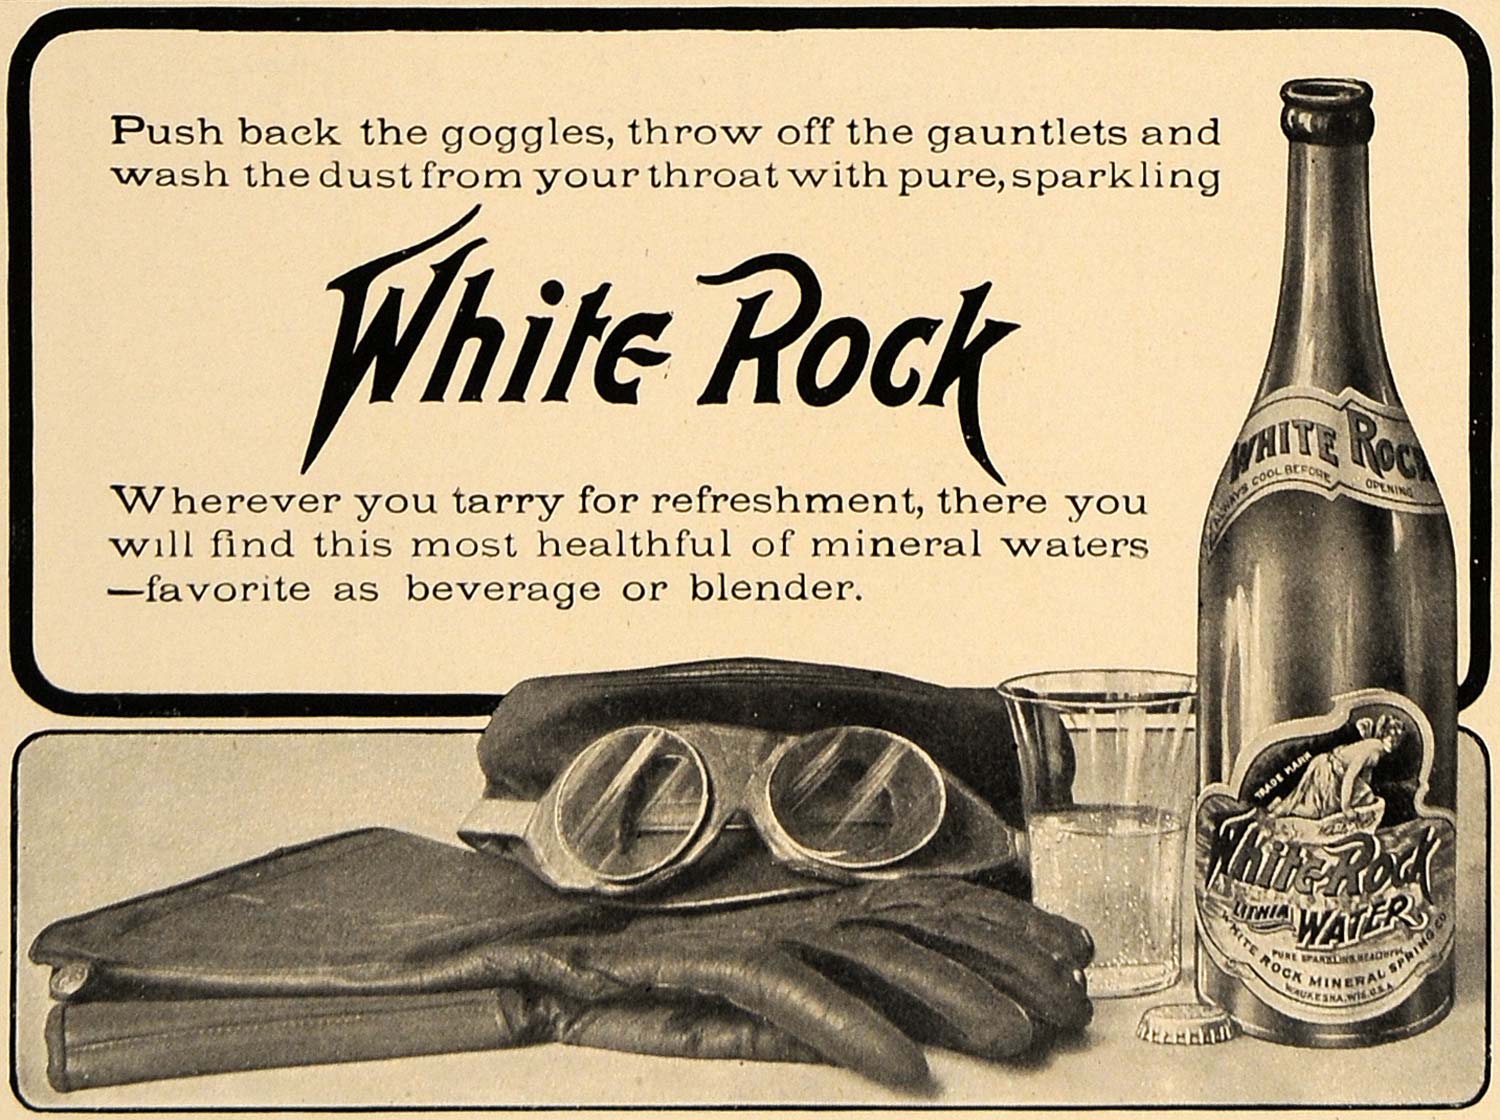 1906 Ad White Rock Mineral Spring Carbonated Water - ORIGINAL ADVERTISING CL8